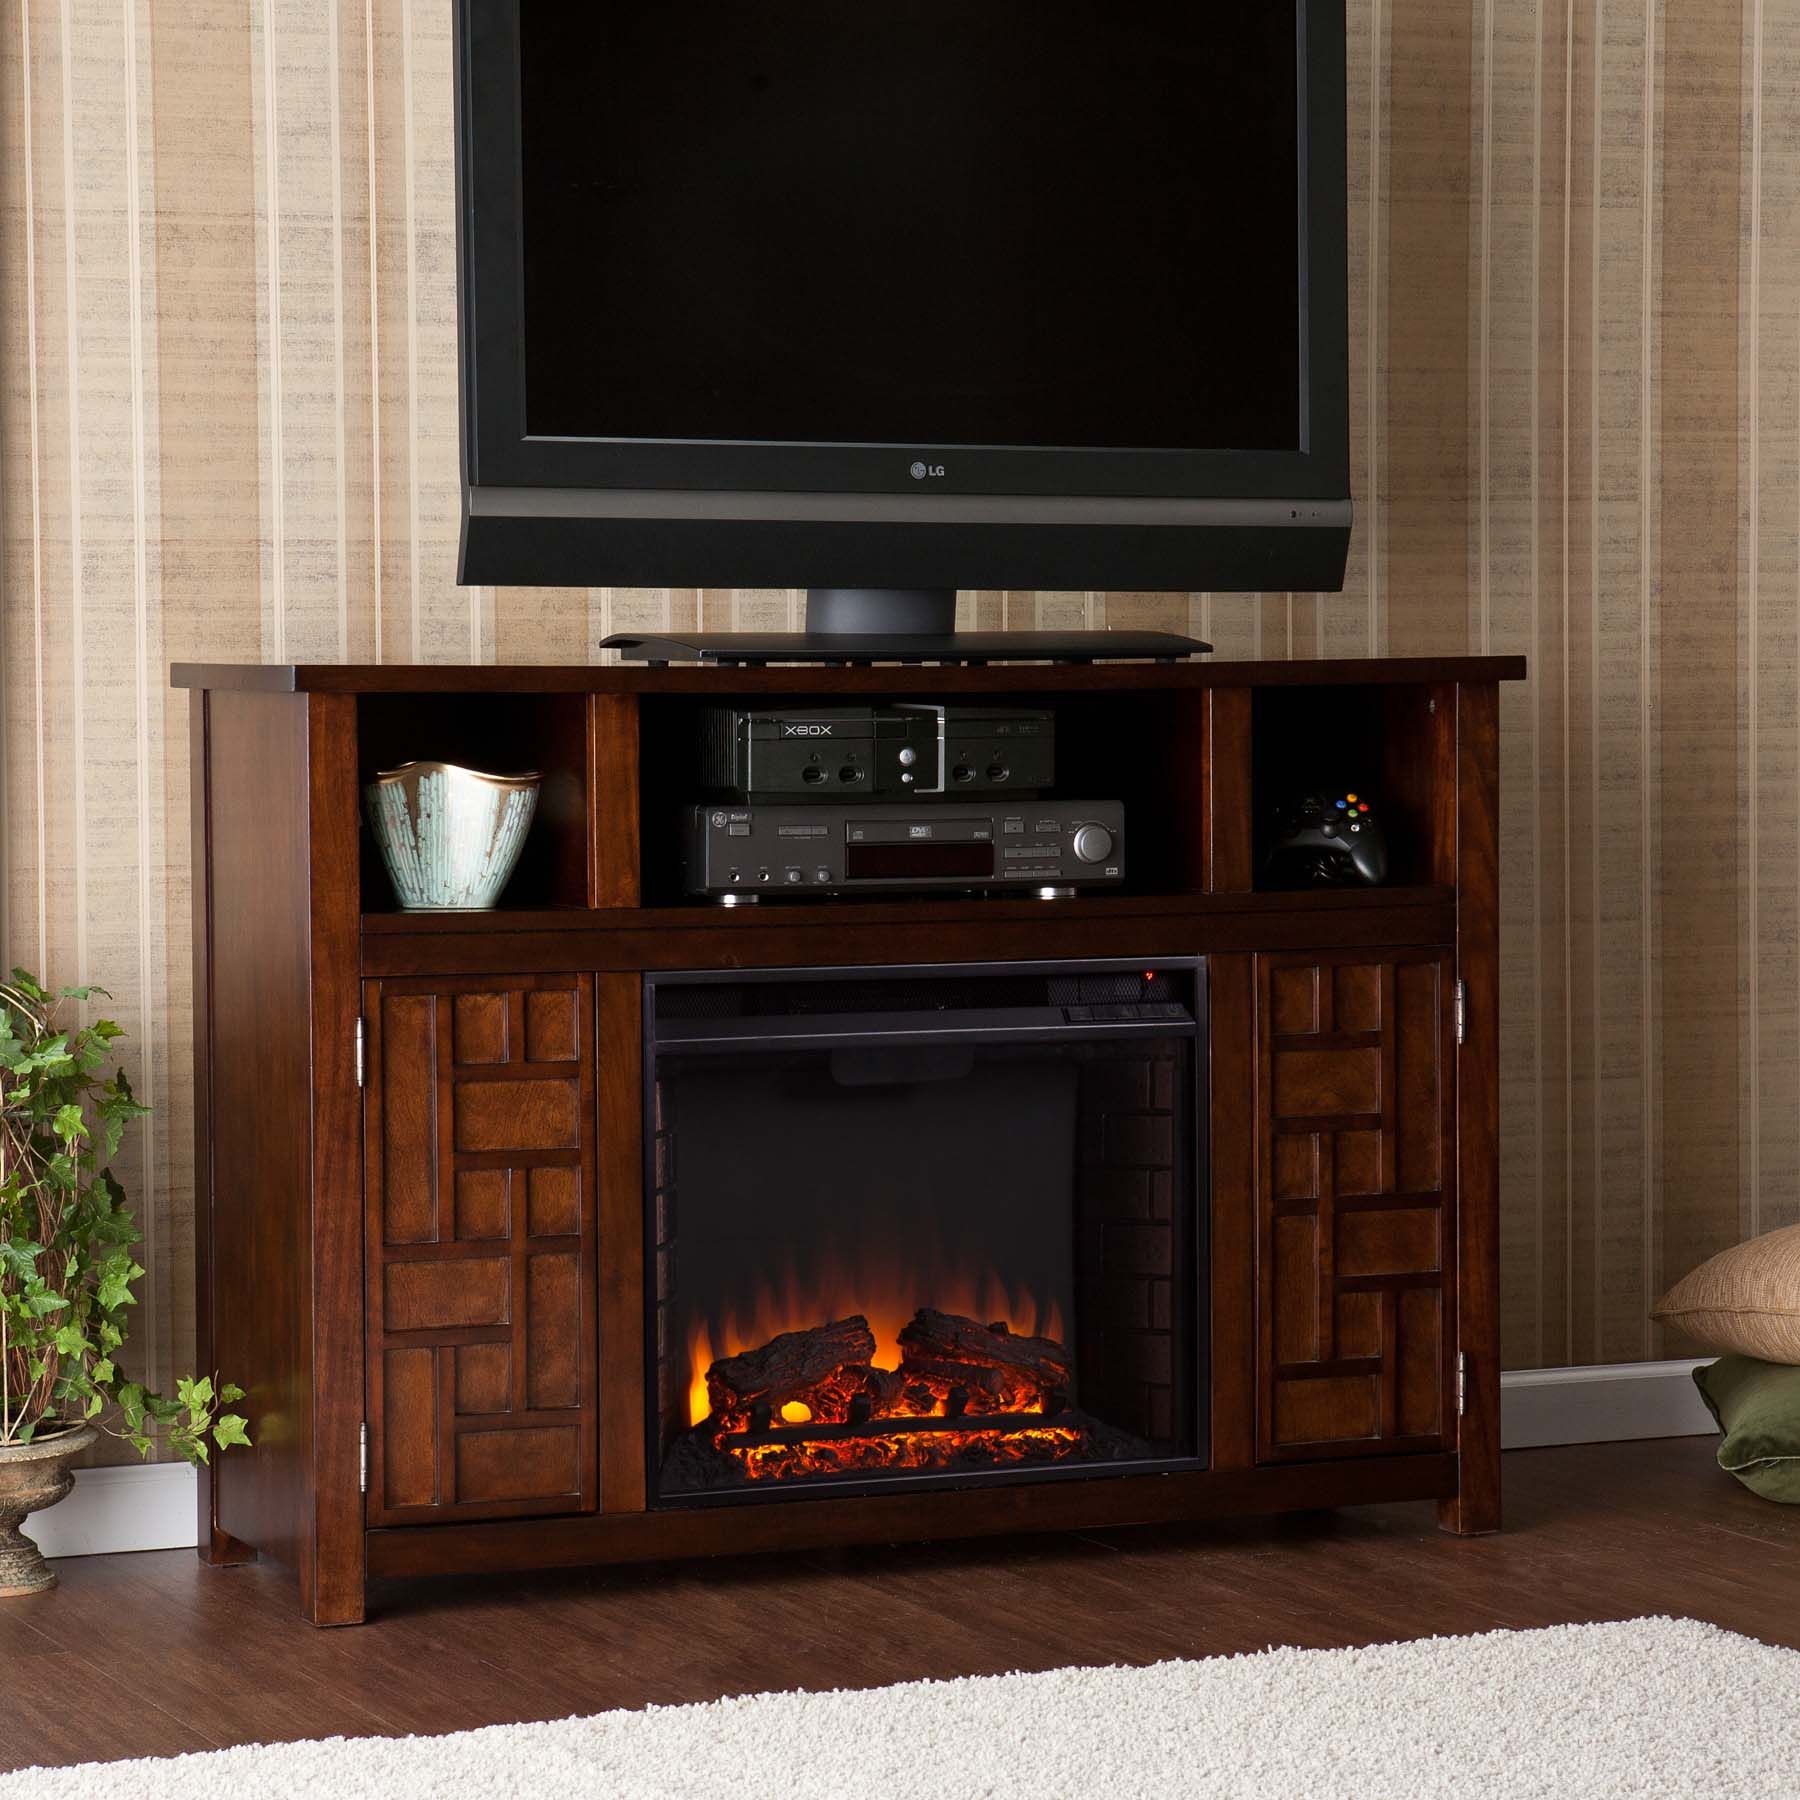 Console Fireplace Costco Best Of 42 Best Rustic Fireplace Images